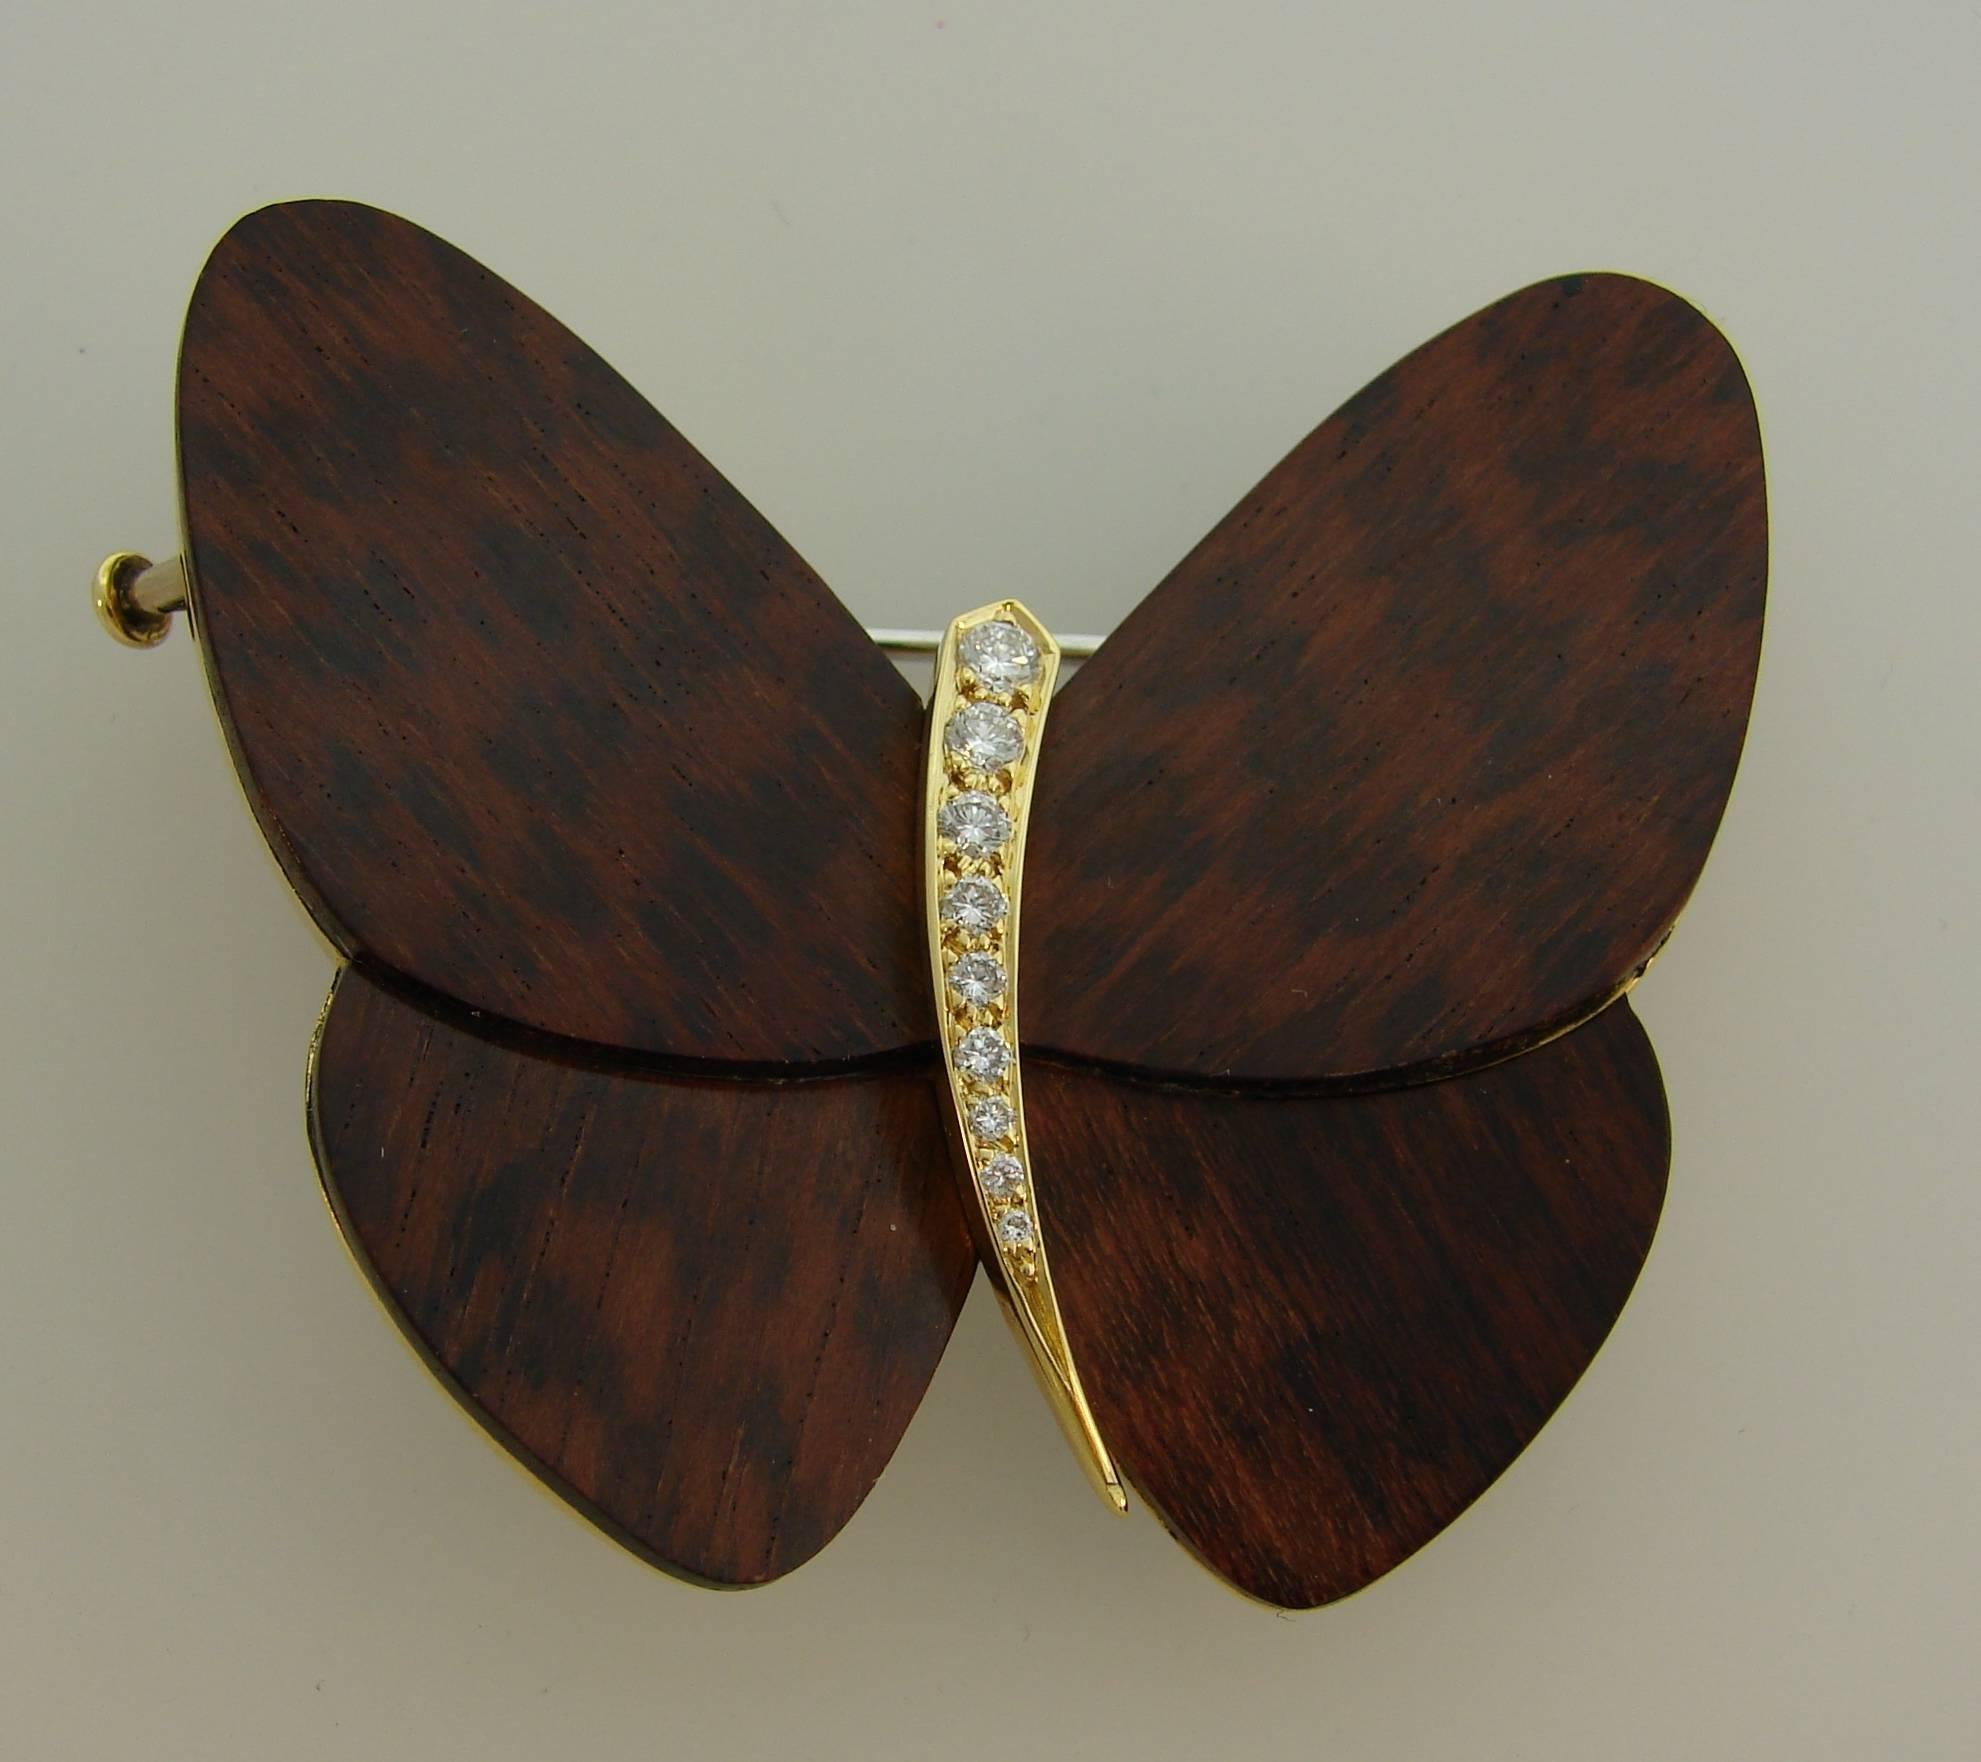 Signature Van Cleef & Arpels butterfly clip. Gracious and feminine, the brooch is a great addition to your jewelry collection. Beautiful lines, perfect proportions - the highlights of this lovely brooch. 
Made of wood and 18 karat yellow gold and